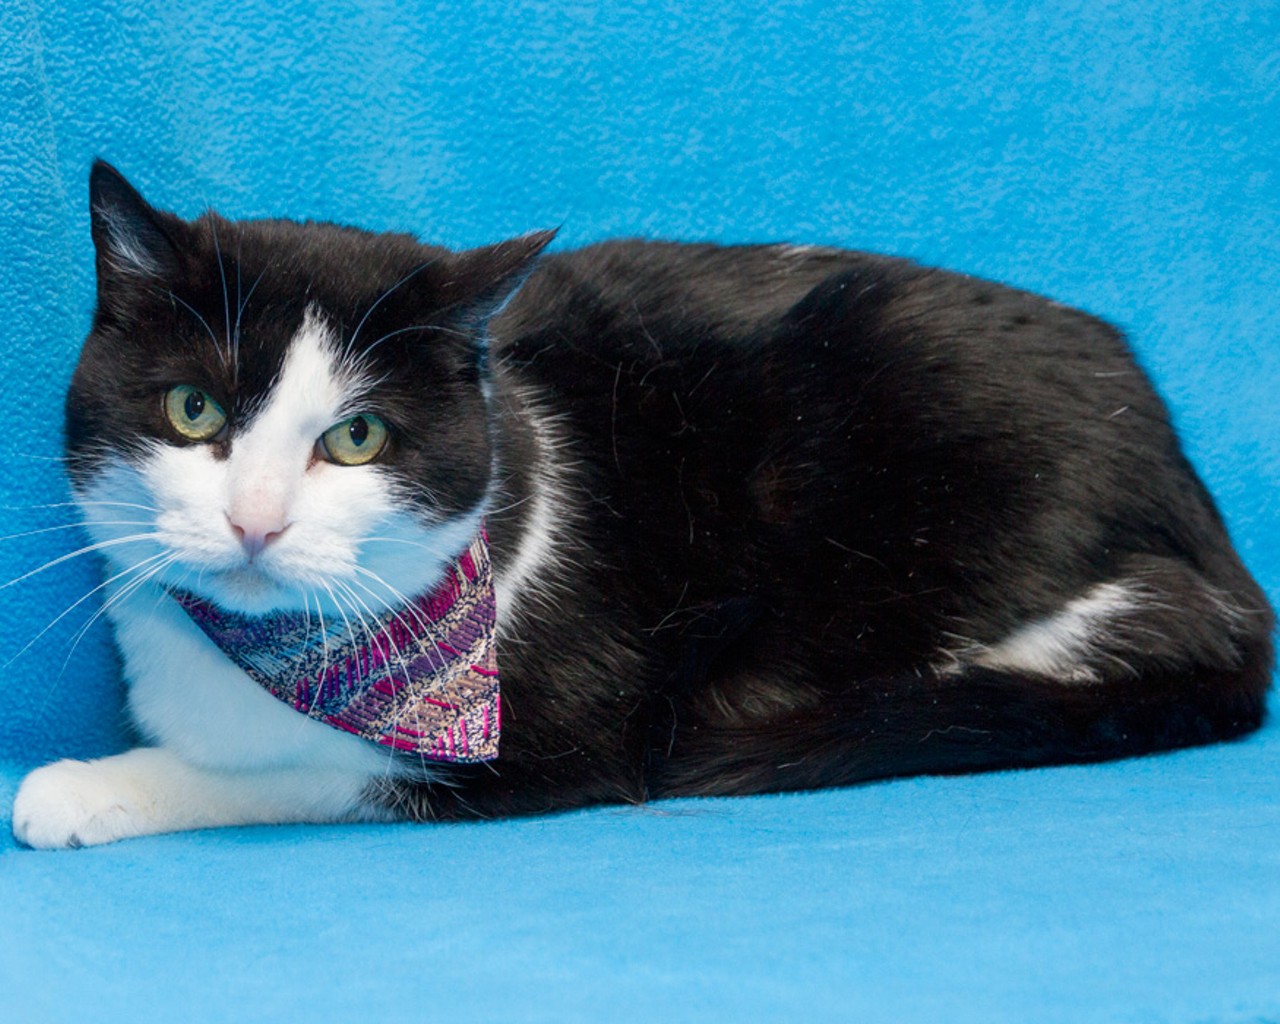 NAME: Peridox
GENDER: Female
BREED: Domestic Short Hair
AGE: 9 years, 7 months
WEIGHT: 9 pounds
SPECIAL CONSIDERATIONS: May prefer a home without children
REASON I CAME TO MHS: Homeless in Canton
LOCATION: Berman Center for Animal Care in Westland
ID NUMBER: 862472